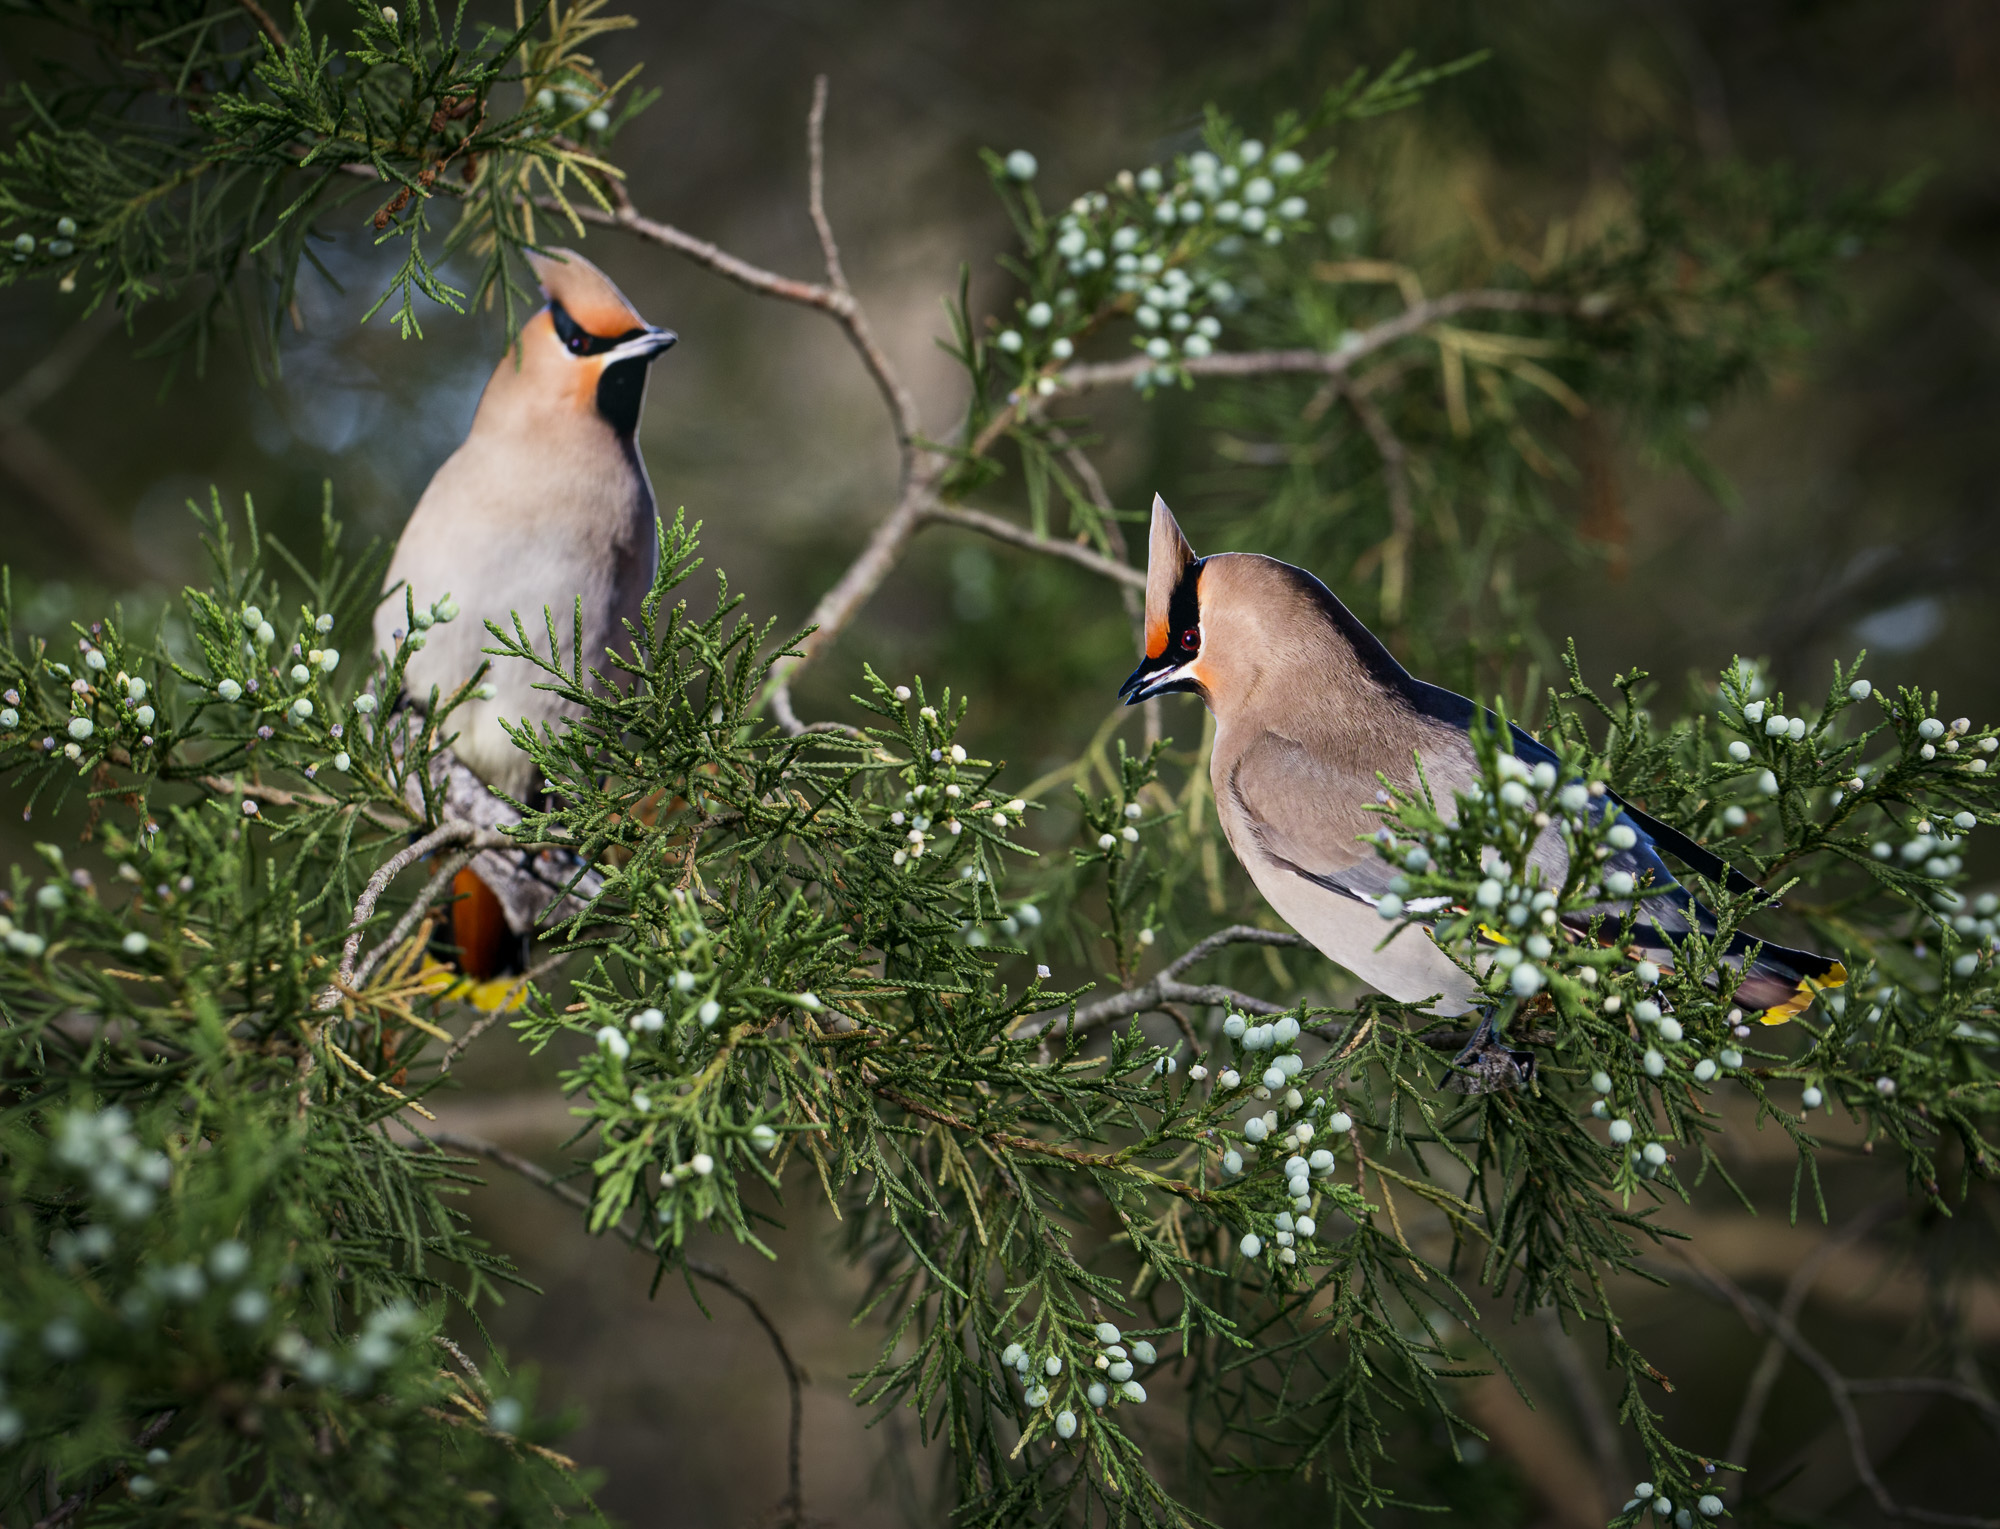 A paper cutout of a photograph of two Bohemian Waxwing birds in an actual Eastern Cedar tree that has little berries on it. The one cutout is in focus in the right foreground and the other bird cutout is out of focus in the left of the background.